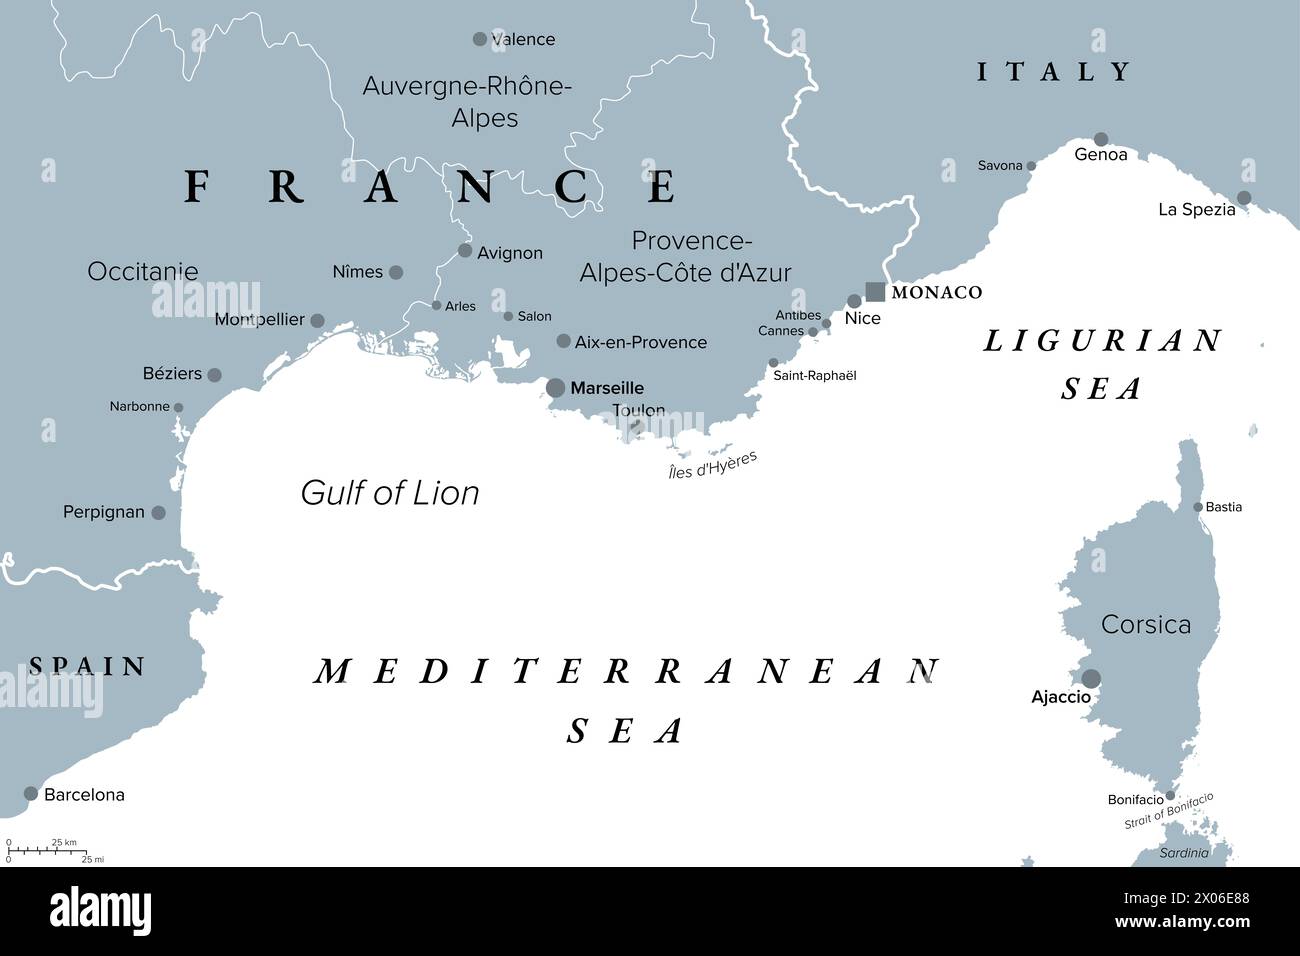 Southern France coastline, gray political map. Southernmost part of France, bordering the Mediterranean Sea. Stock Photo